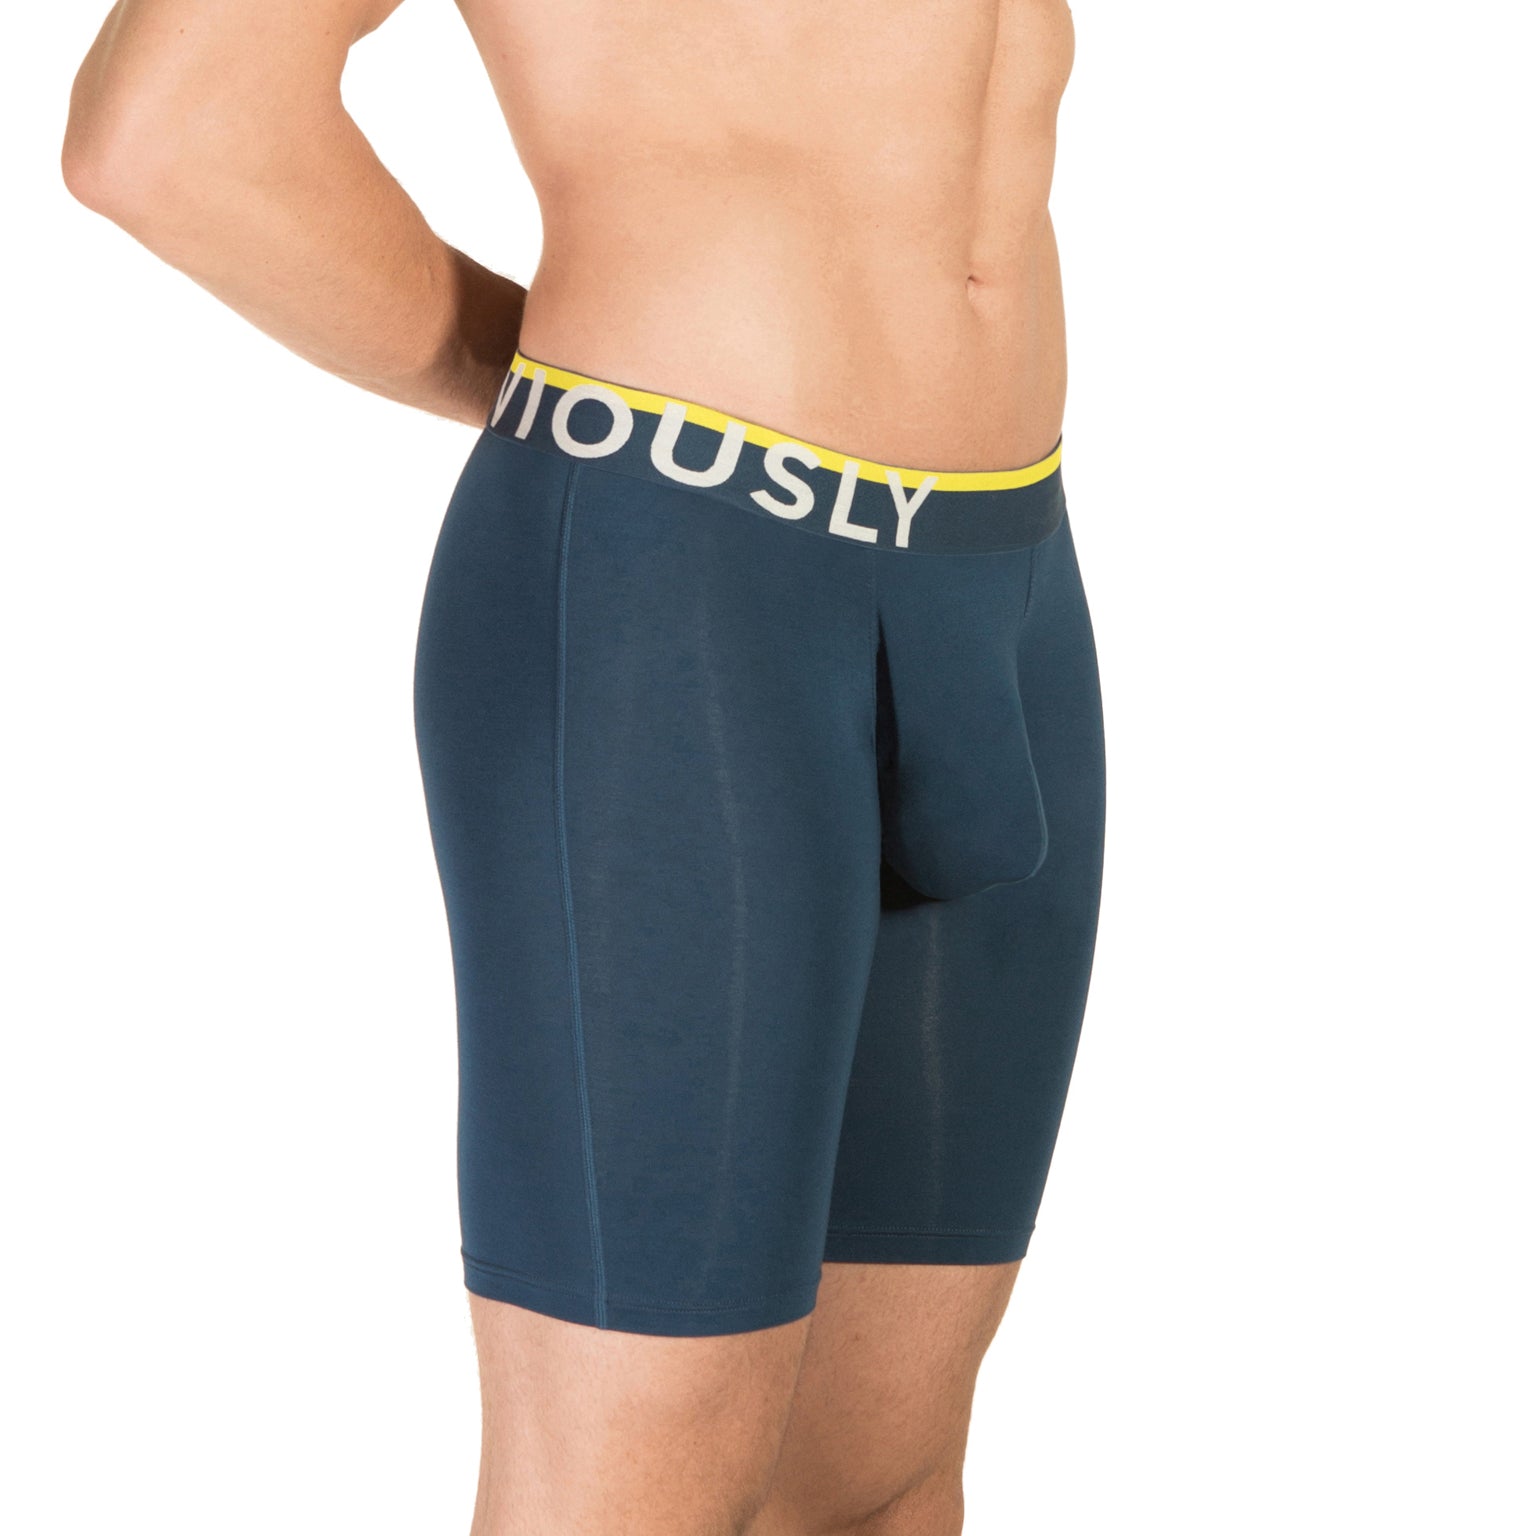 Check out the Obviously Apparel FreeMan Trunks : r/menandunderwear